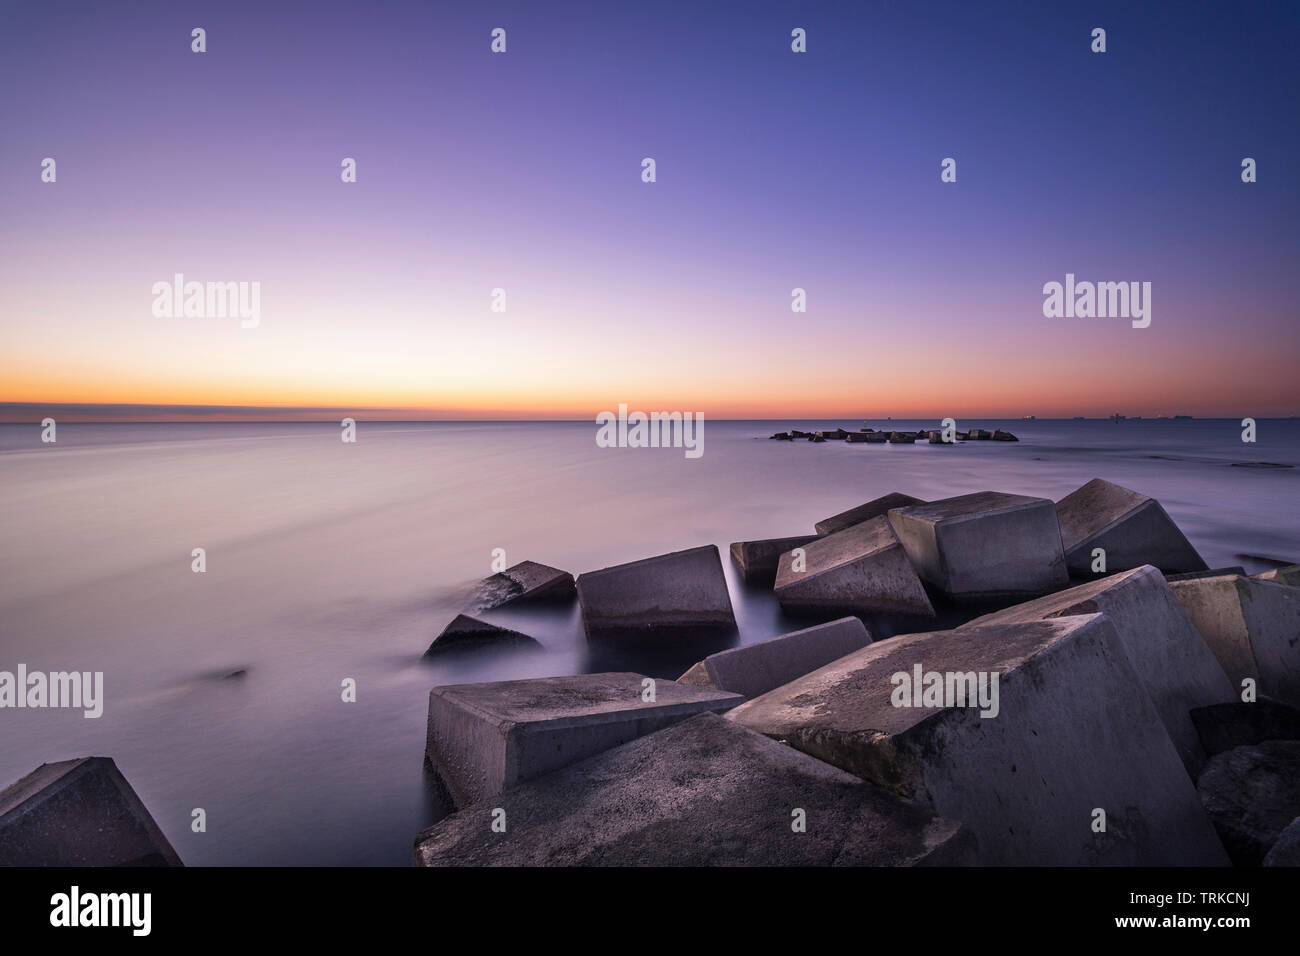 Beach at the blue hour seen from a breakwater Stock Photo